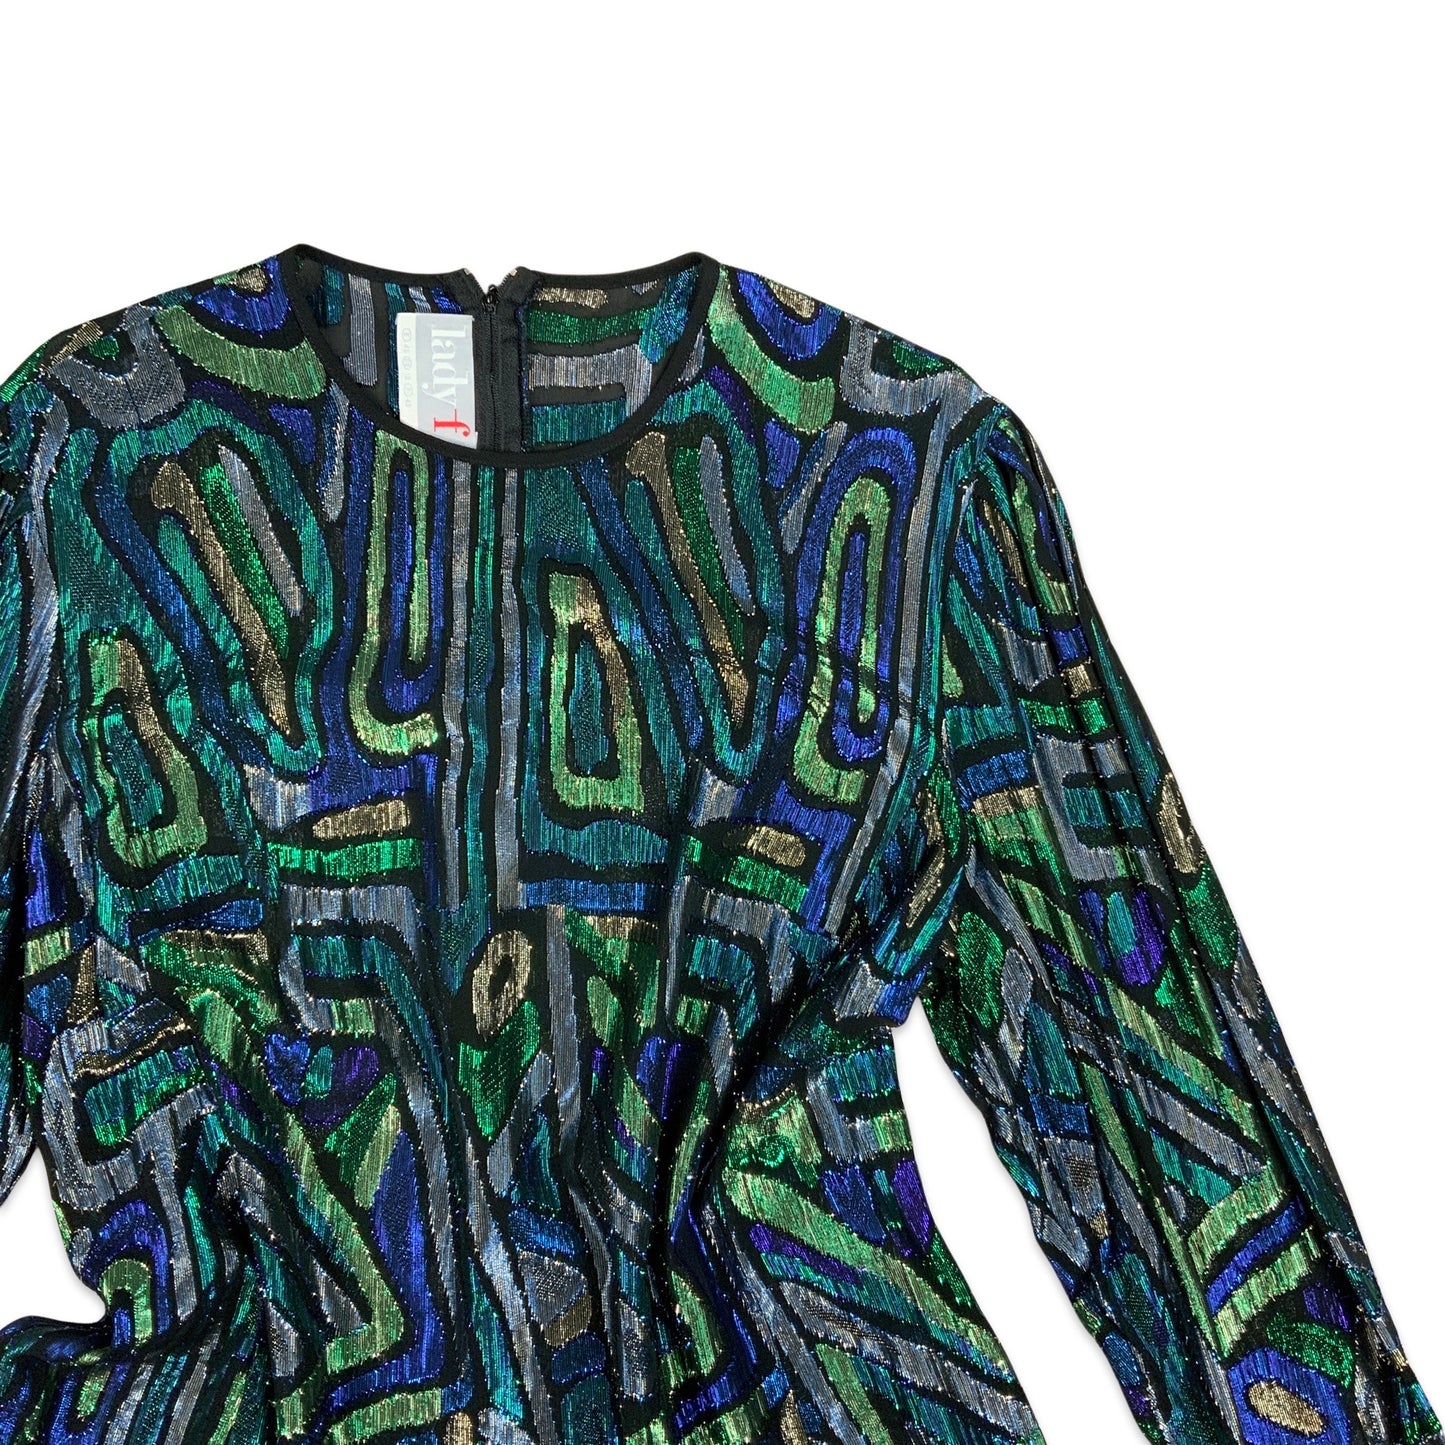 Vintage 80s 90s Blue Green and Black Abstract Pattern Lurex Blouse 14 16 18